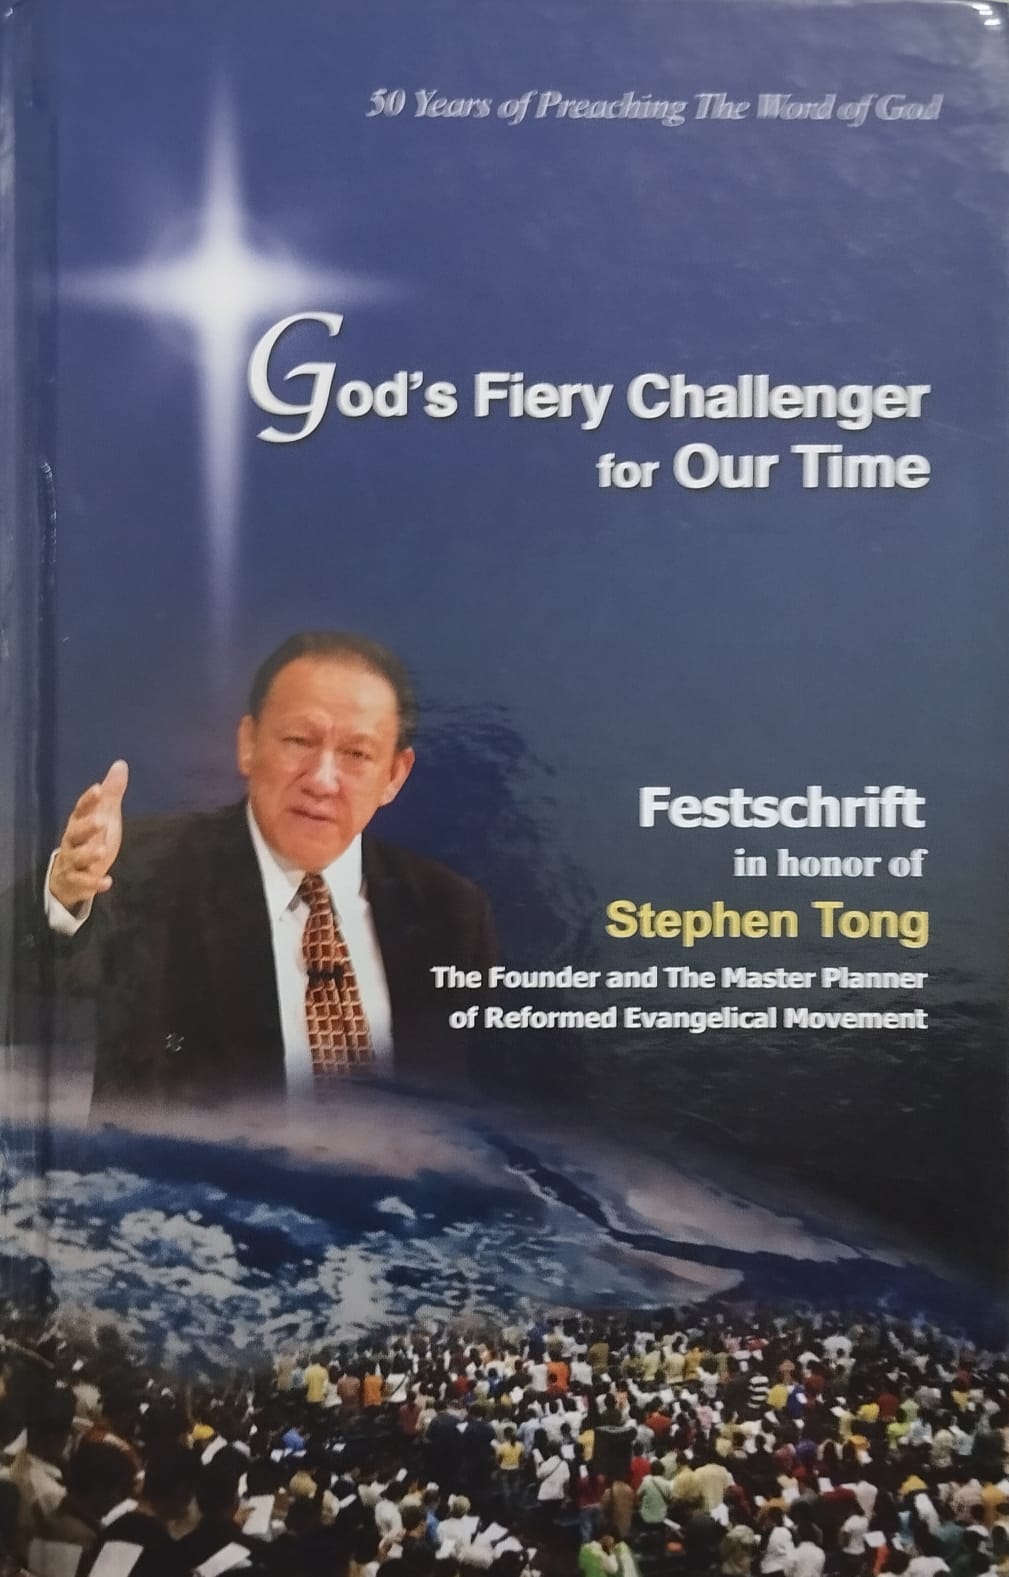 God’s Fiery Challenger for Our Time